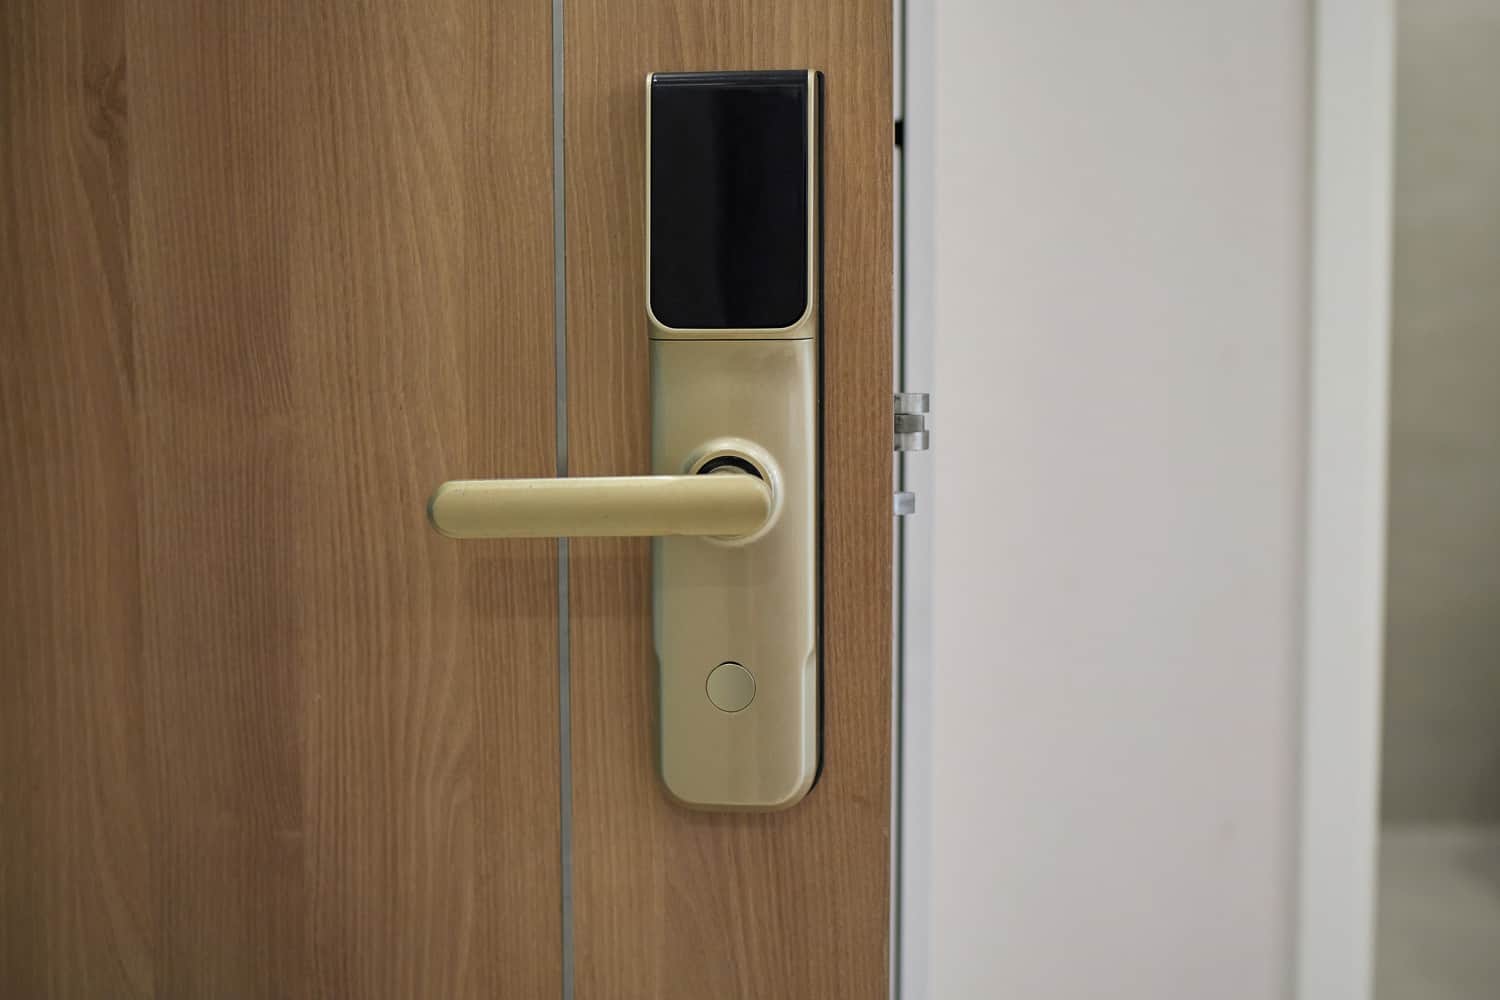 Digital door lock security systems for good safety of apartment door. Electronic door handle with key pads numbers.